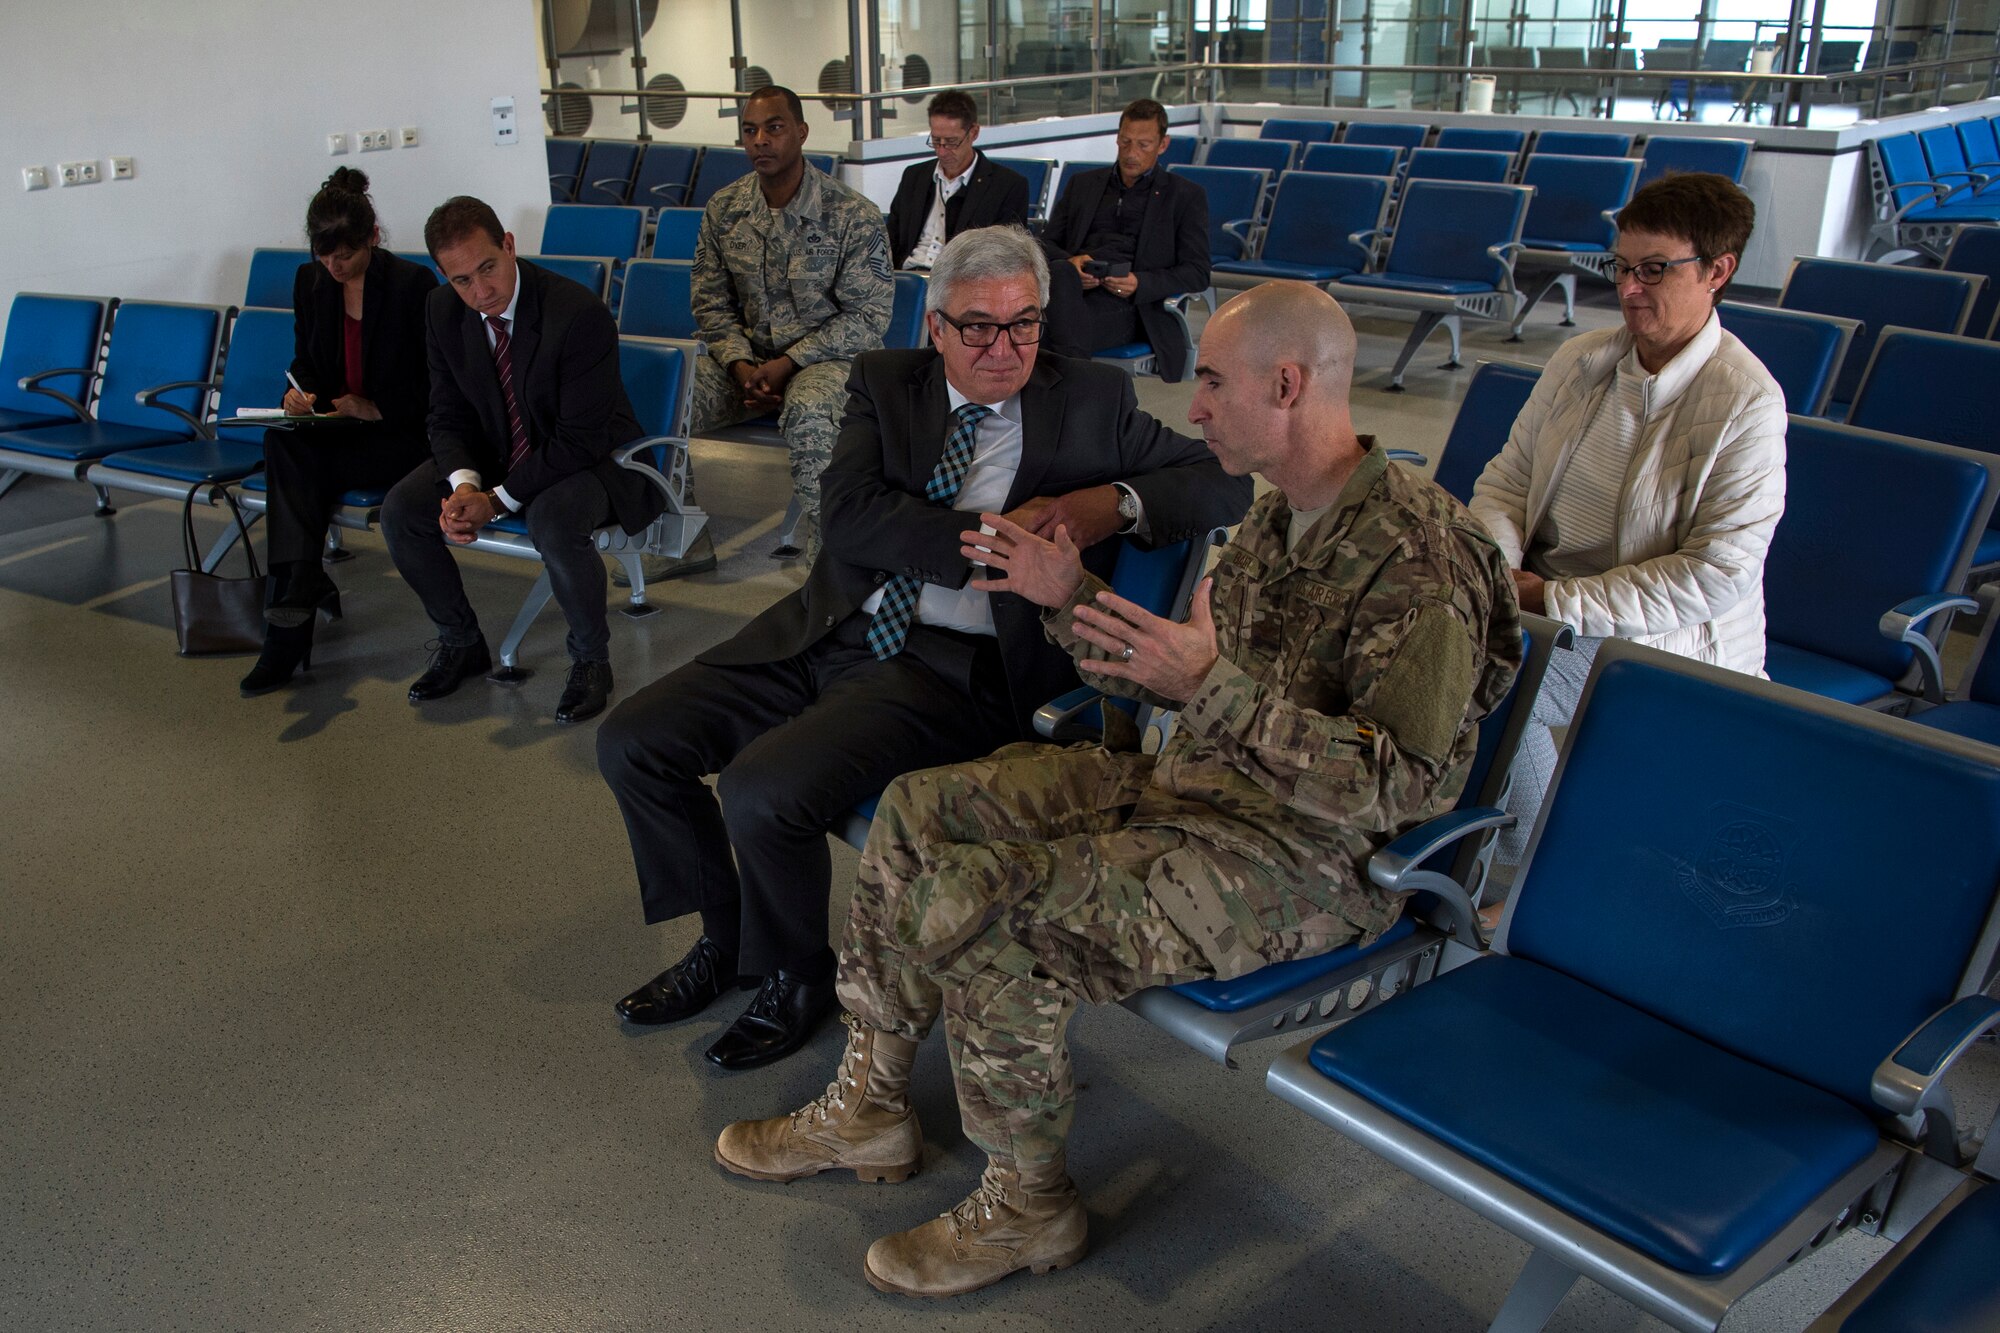 U.S. Air Force Col. Jason Bailey, 52nd Fighter Wing commander, center right, speaks with Roger Lewentz, Minister of the Interior of Rhineland-Palatinate, Germany, center, in the passenger terminal at Spangdahlem Air Base, Germany, Oct. 22, 2018. Lewentz was provided a base tour and mission brief. Bailey discussed the importance of Spangdahlem AB's mission in Europe. (U.S. Air Force photo by Airman 1st Class Valerie Seelye)